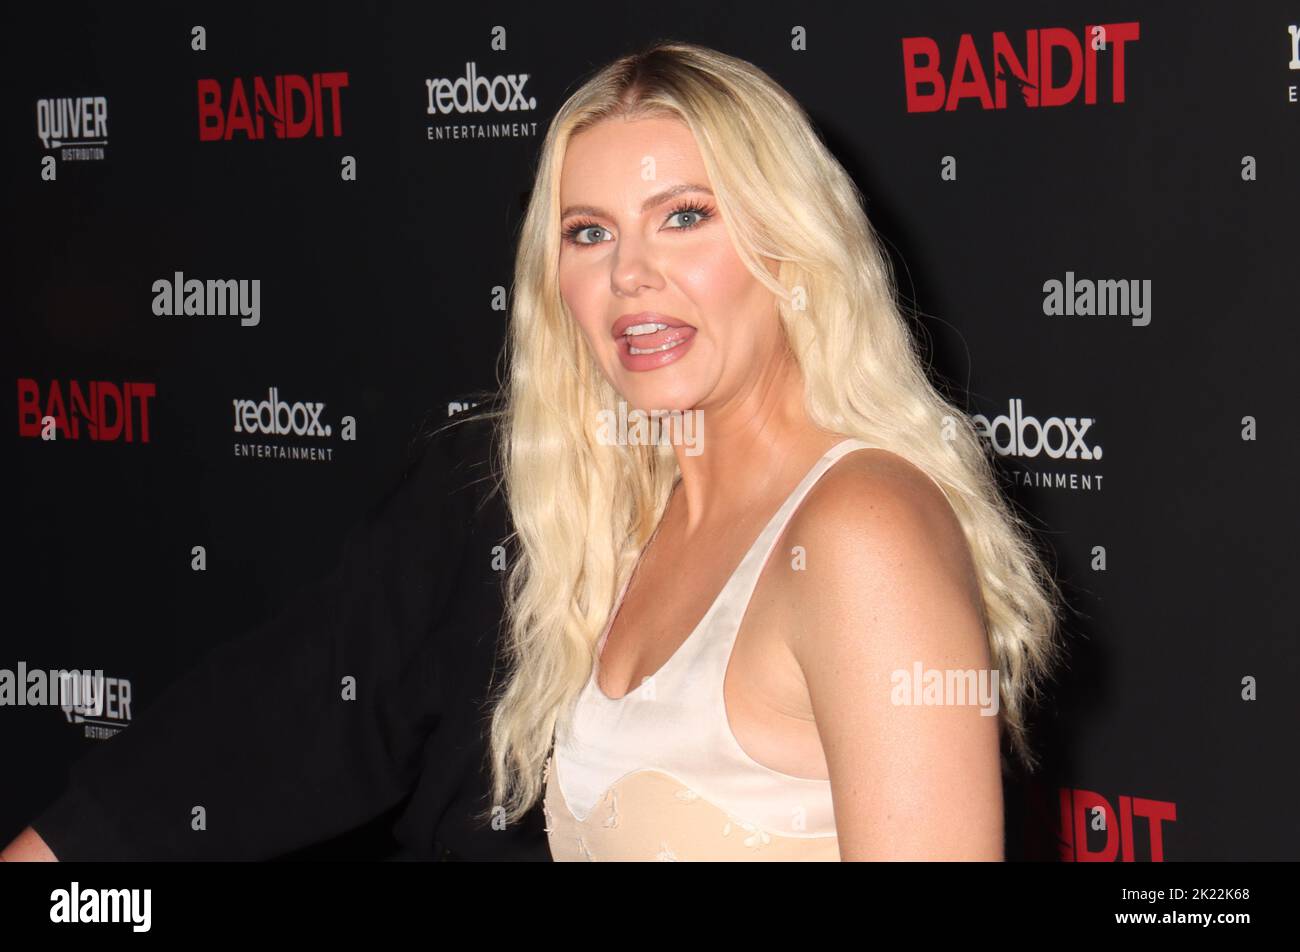 Los Angeles, Stati Uniti. 21st Set, 2022. Elisha Cuthbert 09/21/2022 The World Premiere of 'Bandit' held at the Harmony Gold Theater in Los Angeles, CA Photo by Izumi Hasegawa/HollywoodNewsWire.net Credit: Hollywood News Wire Inc./Alamy Live News Foto Stock